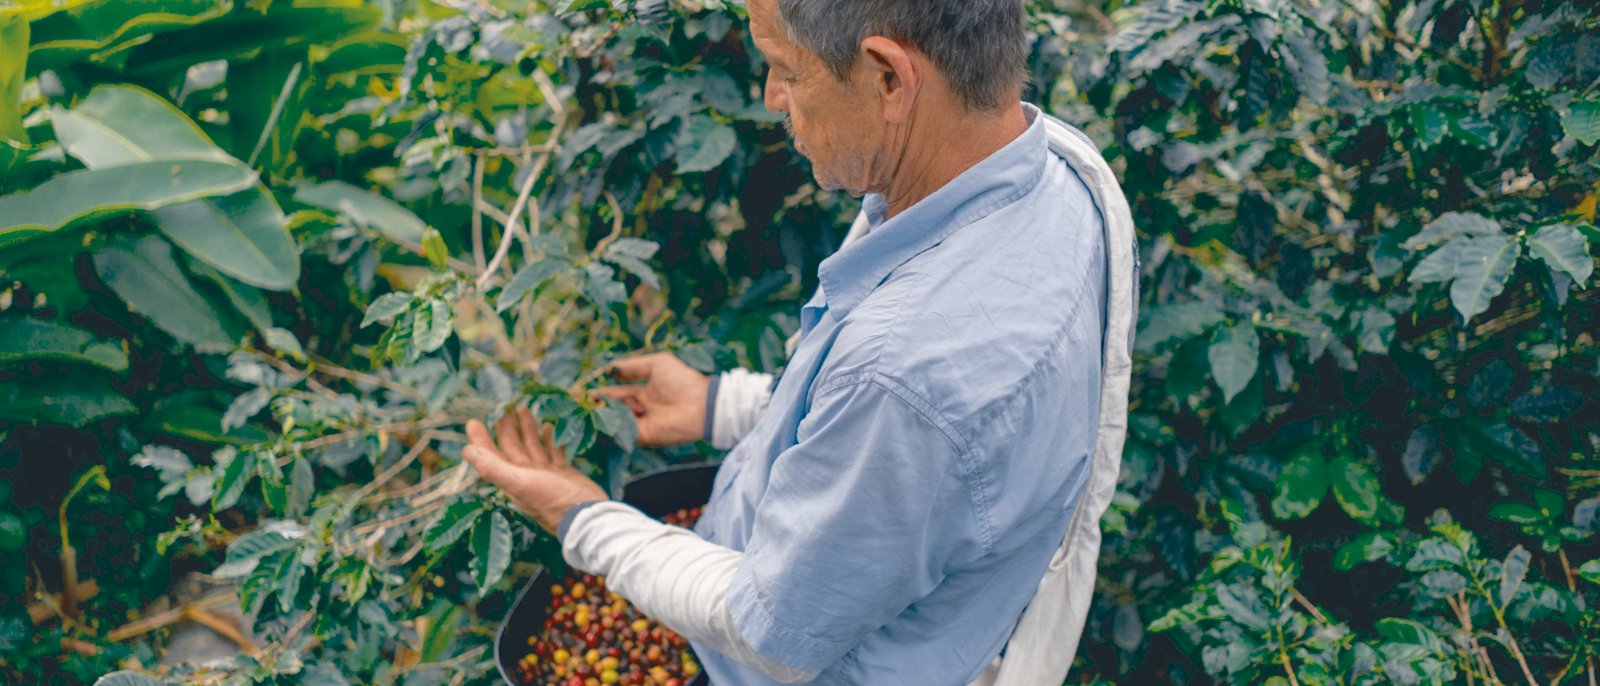 Latin American farmer collecting coffee beans at a farm - agriculture concepts